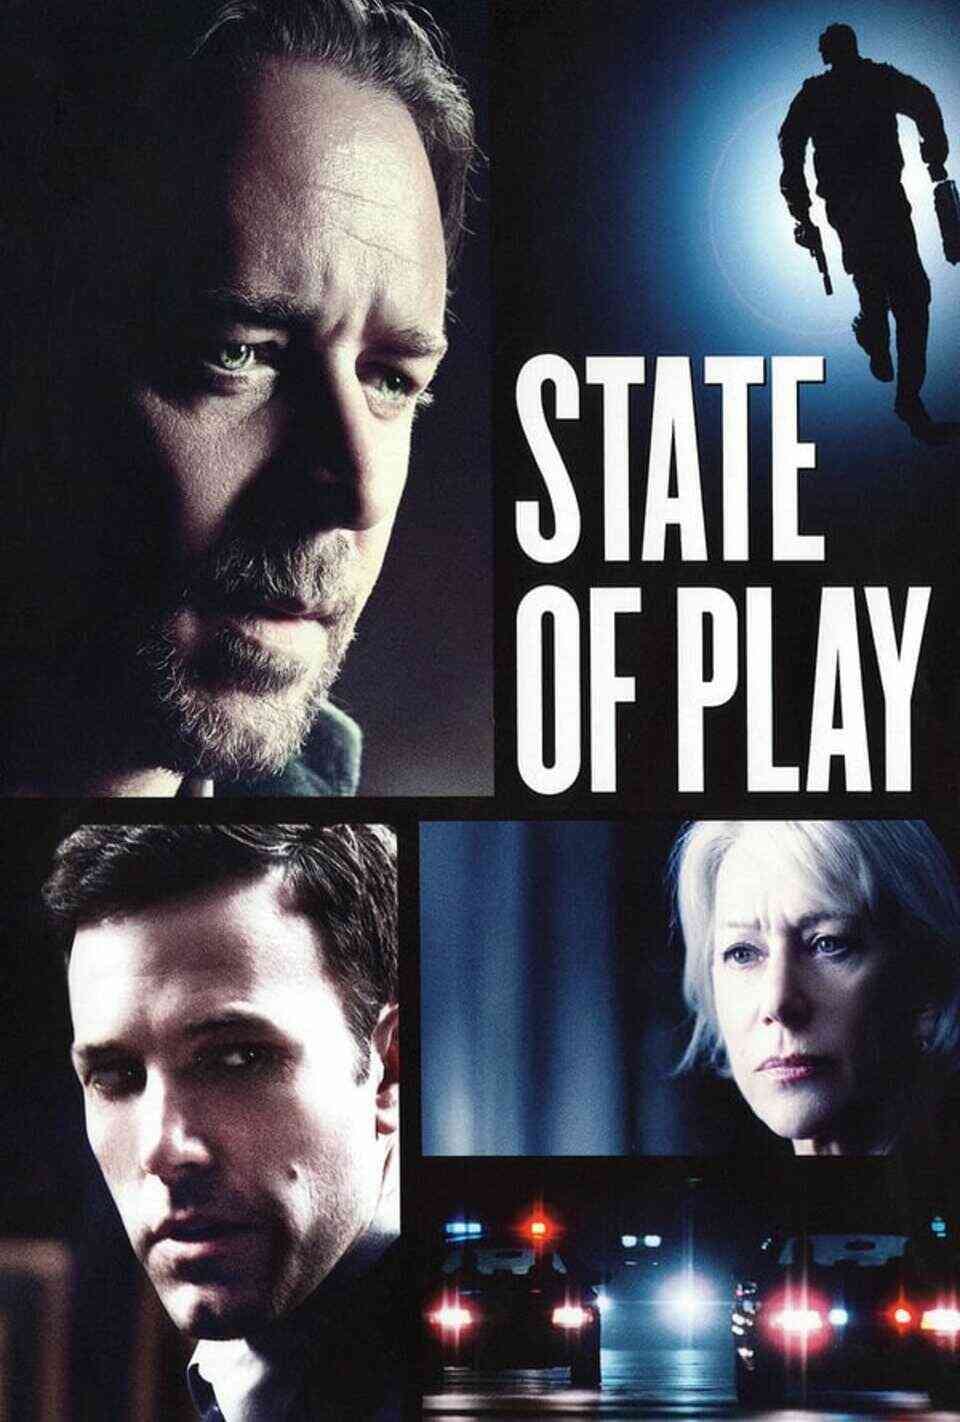 Read State of Play screenplay.